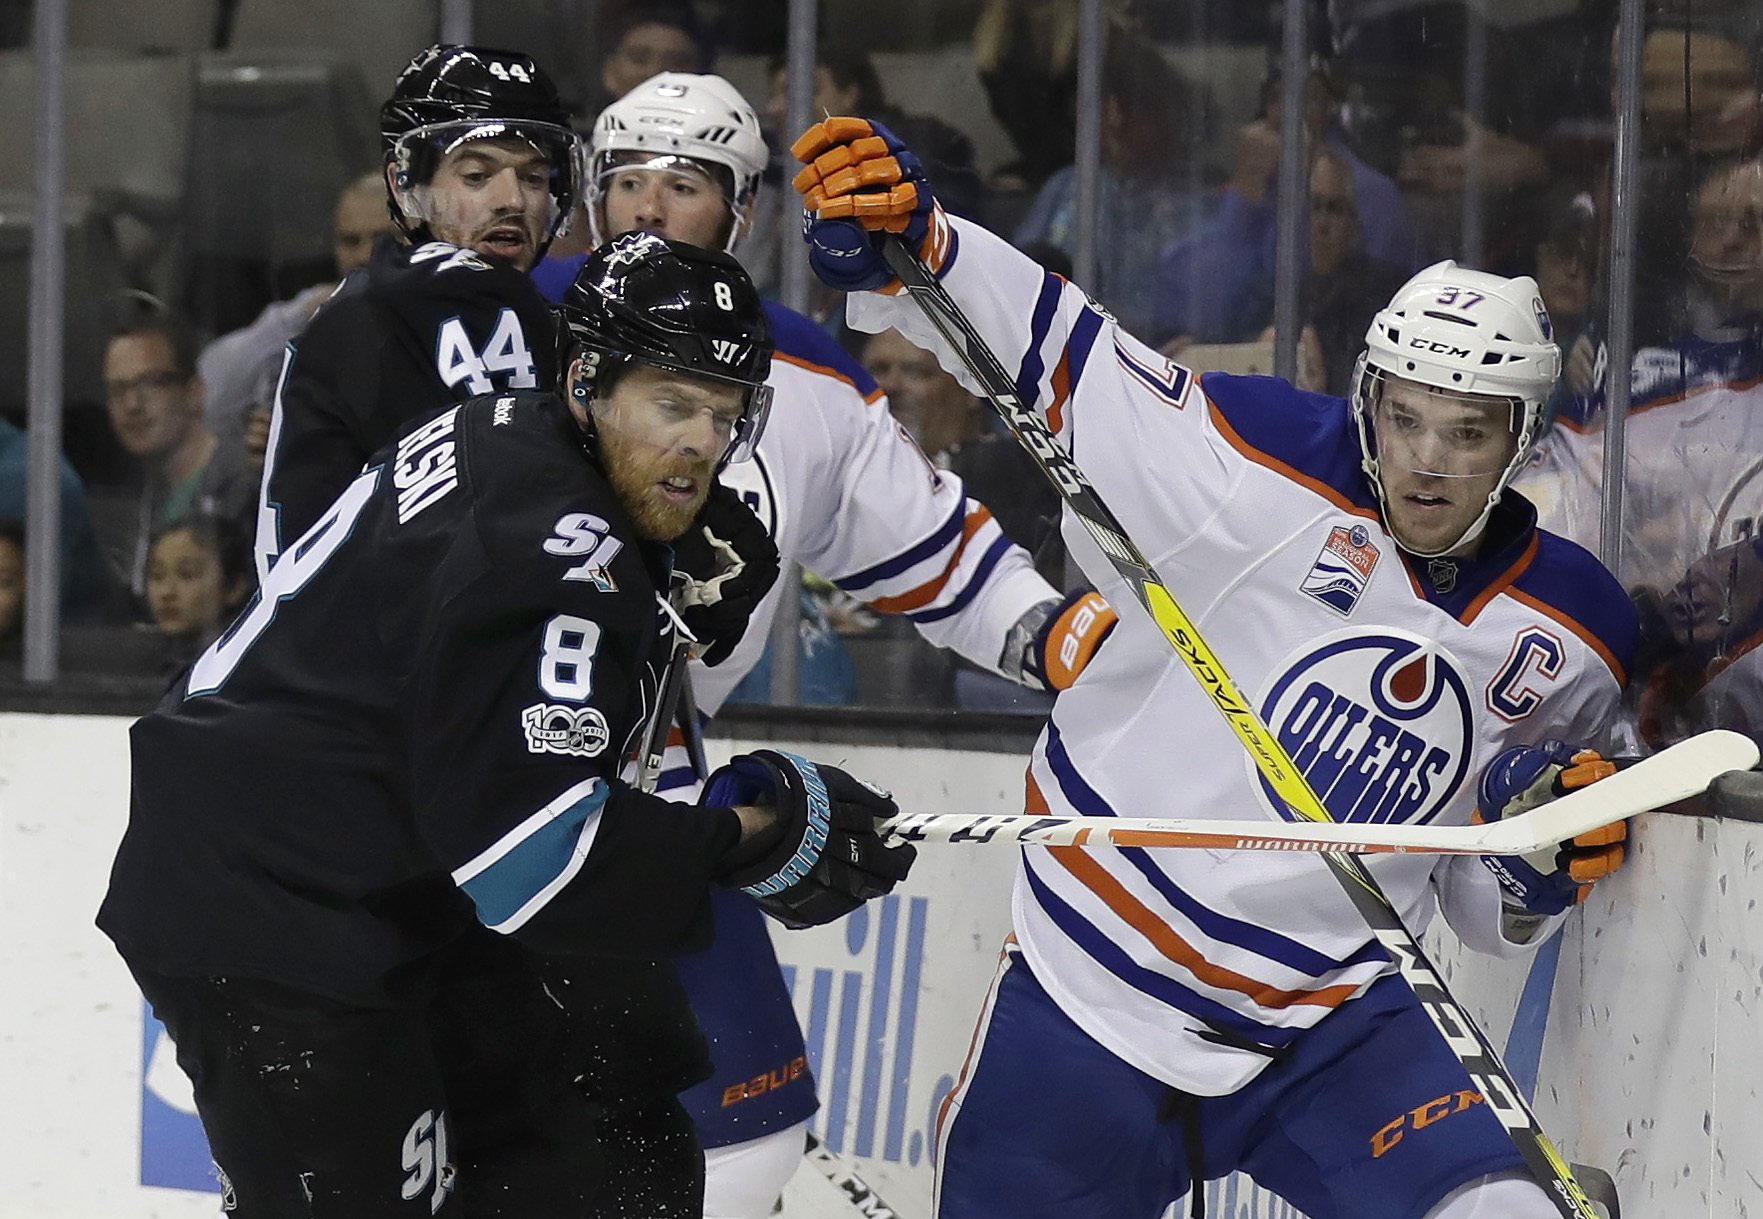 San Jose Sharks' Joe Pavelski (8) pushes Edmonton Oilers' Connor McDavid, right, against the boards during the third period of an NHL hockey game Thursday, April 6, 2017, in San Jose, Calif. (AP Photo/Marcio Jose Sanchez)